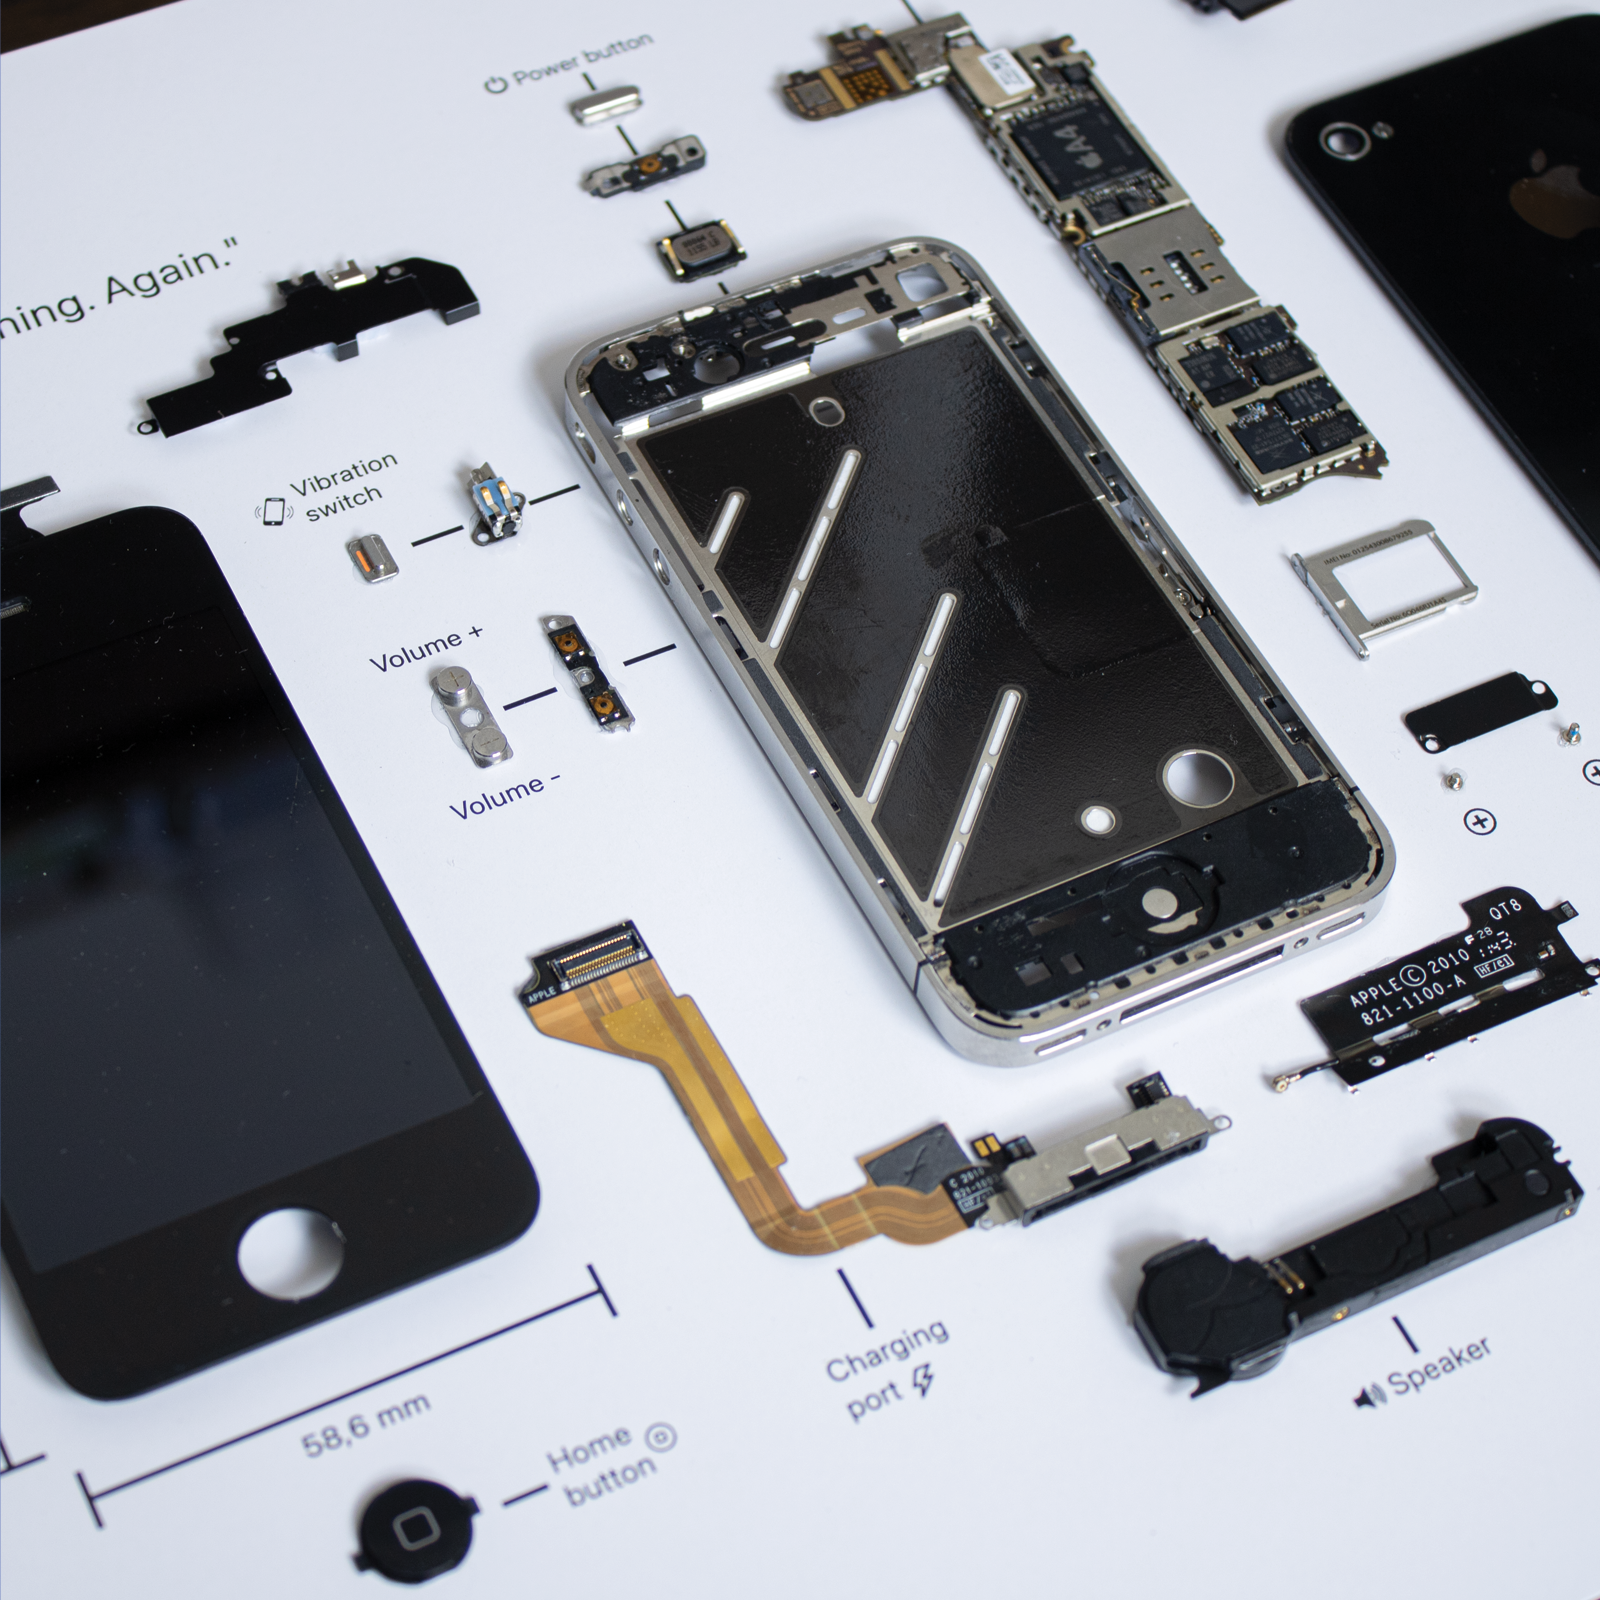 iPhone 4 disassembled in a frame